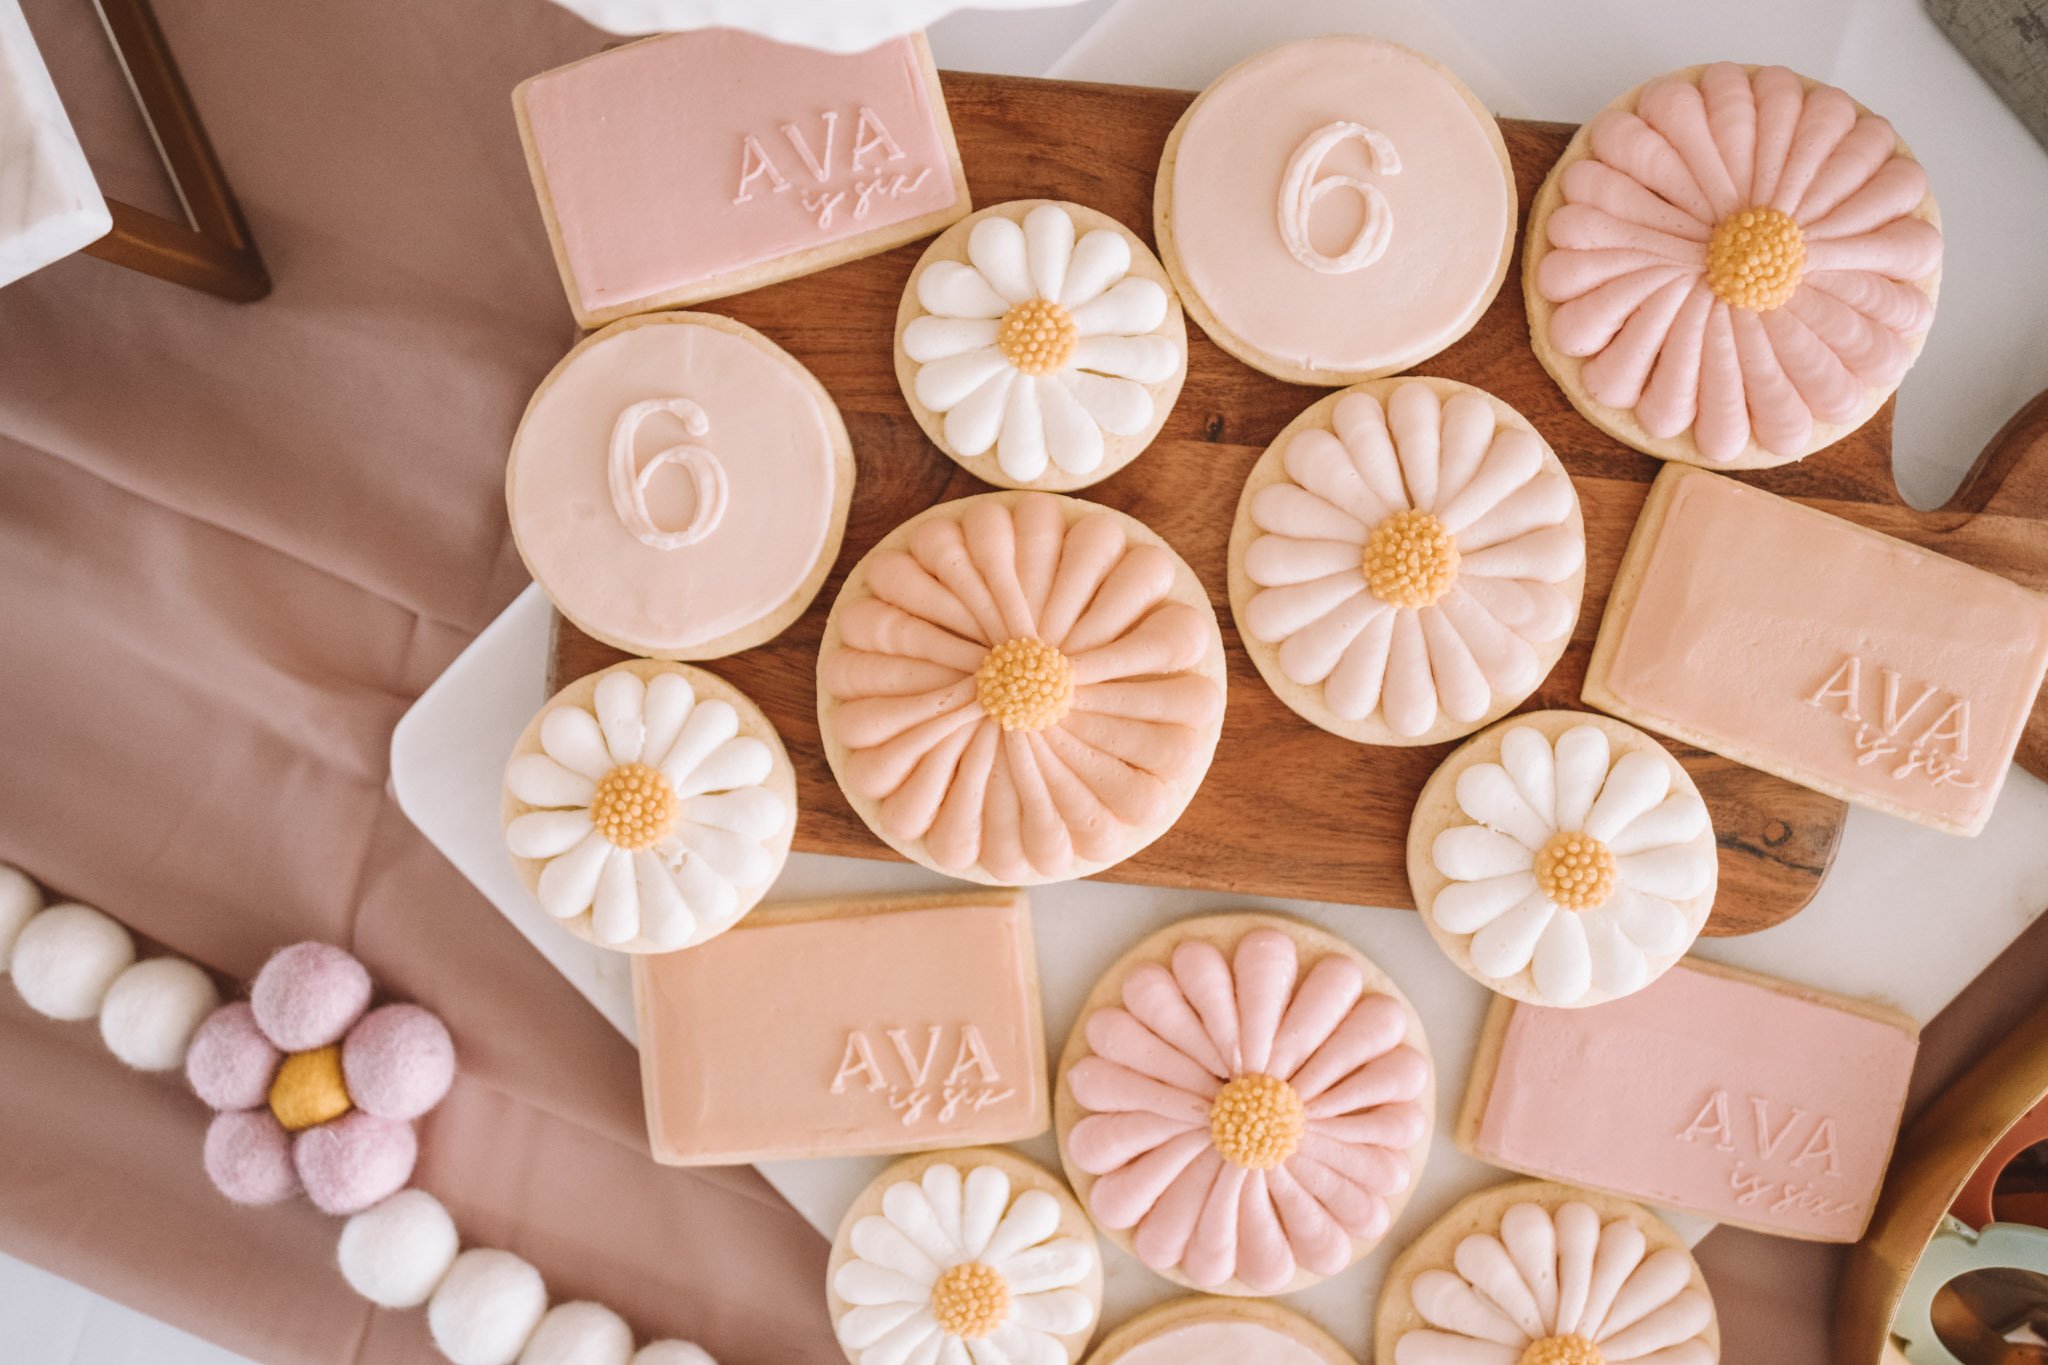 Kids Flower Party Cookies | Ava’s 6th Birthday